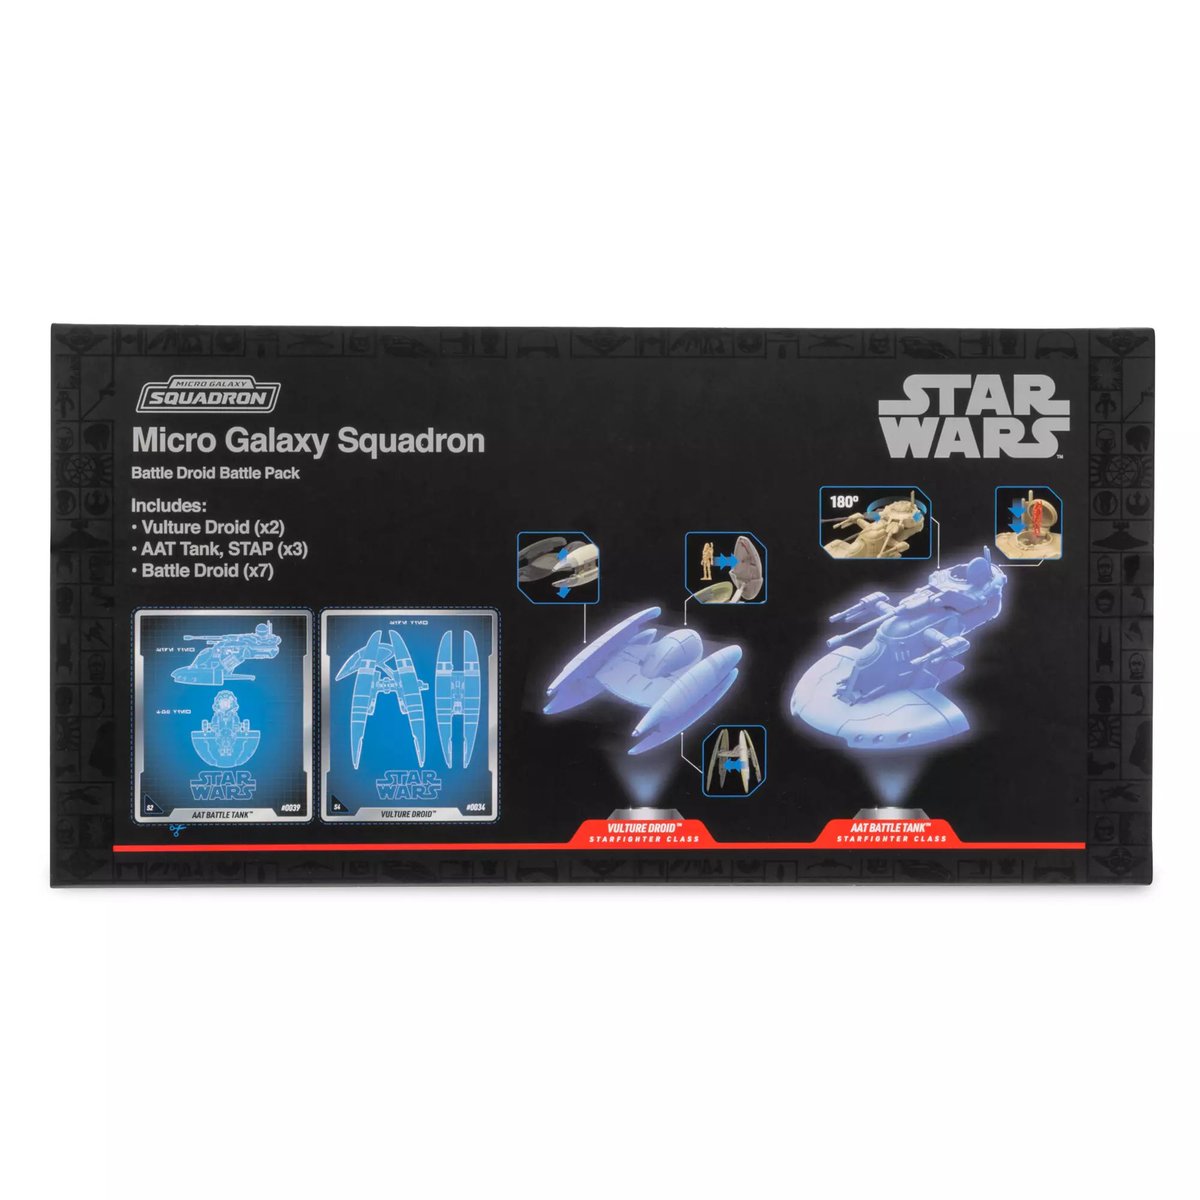 Jazwares Star Wars Micro Galaxy Squadron Battle Droid Battle Pack is up for preorder at the Disney Store ($59.99) - bit.ly/44A44Nu